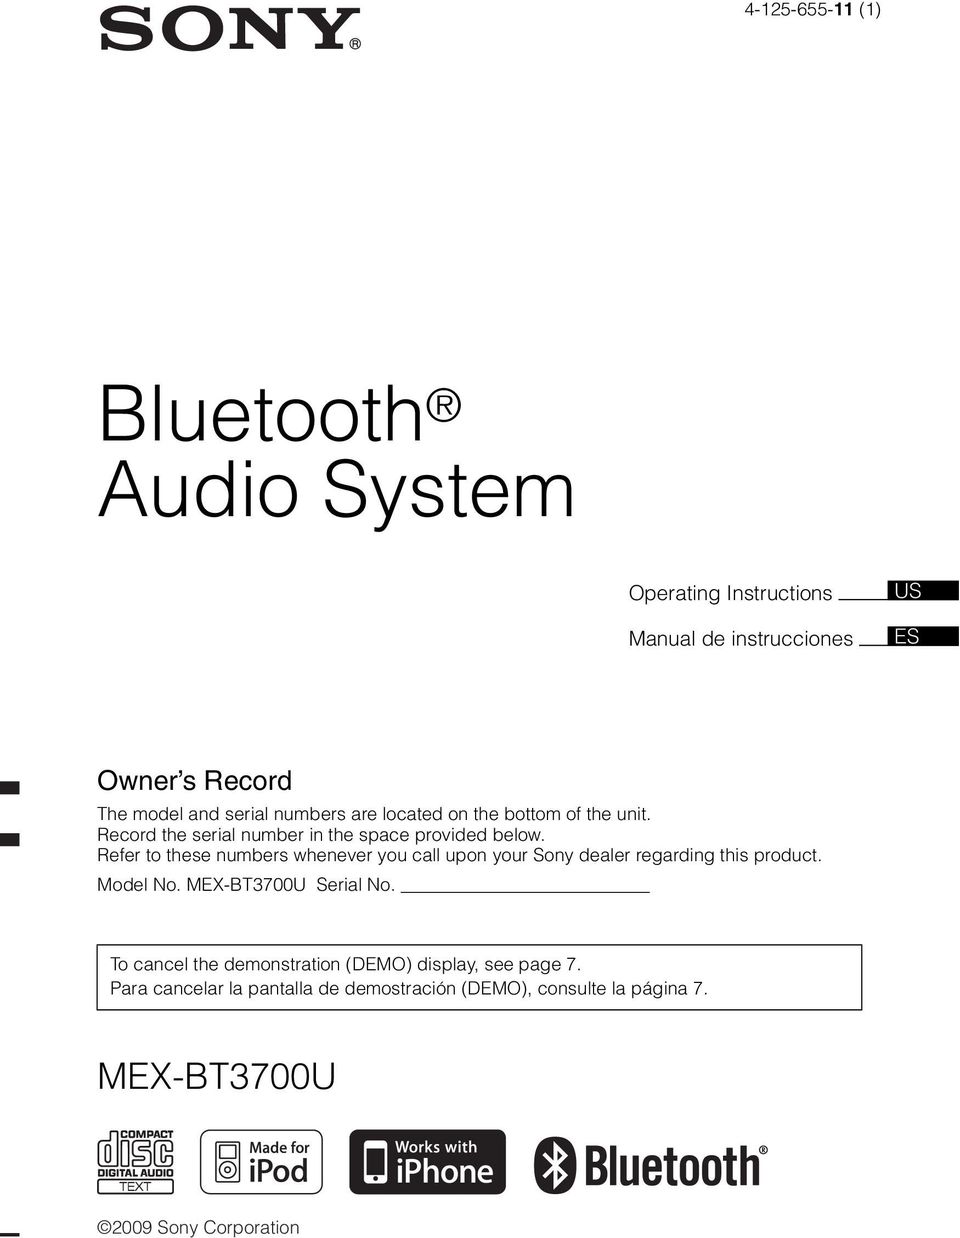 Refer to these numbers whenever you call upon your Sony dealer regarding this product. Model No. MEX-BT3700U Serial No.